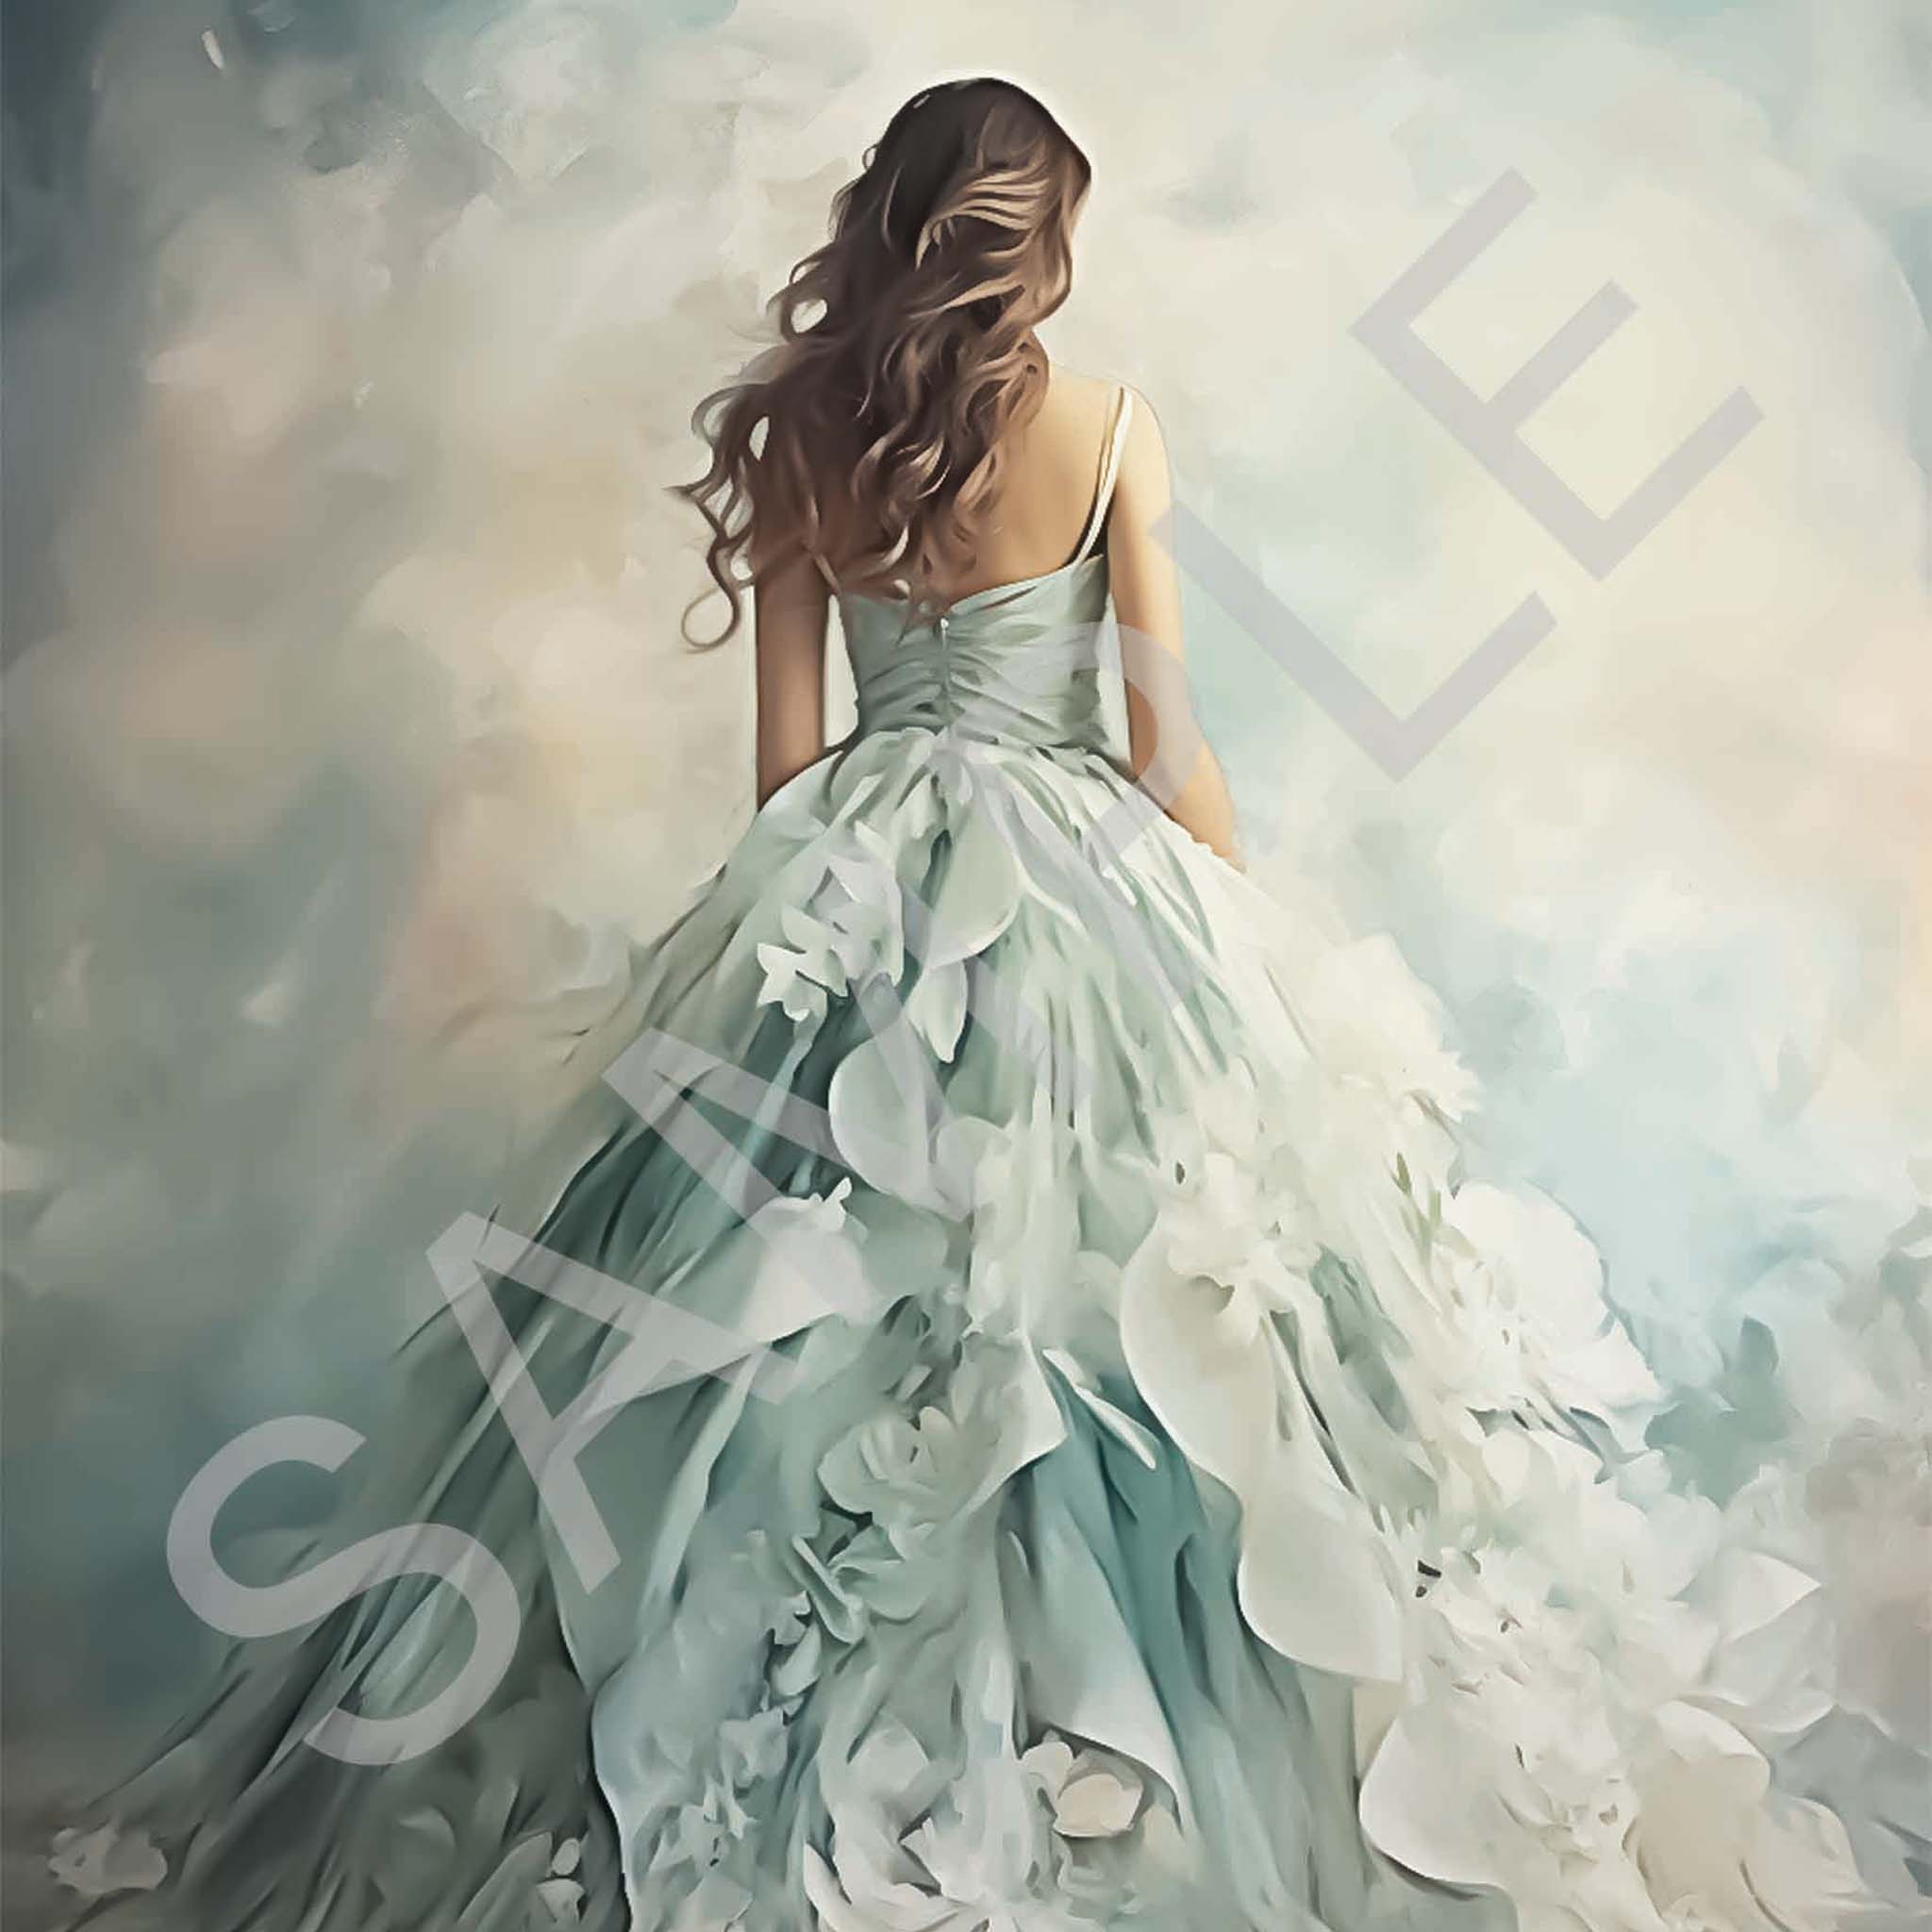 Close-up of an A4 rice paper design that features a stunning girl in a beautiful blue ballgown with floral details, walking towards a misty background.